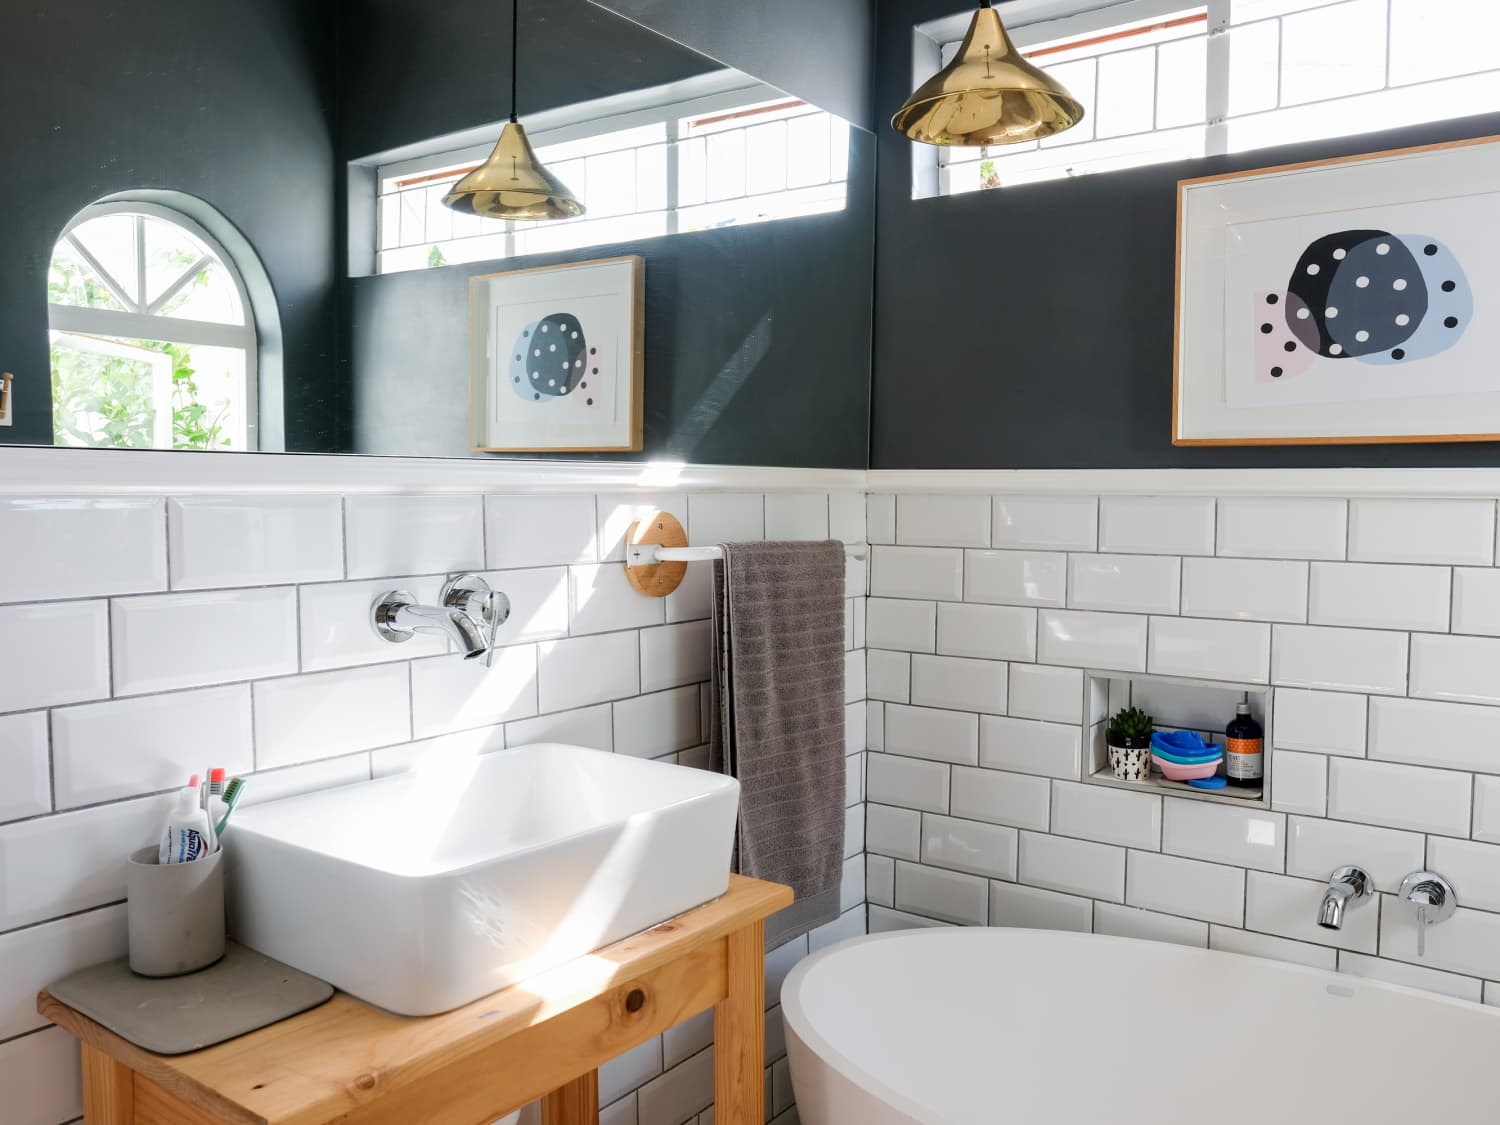 Tips To Design A Smart Bathroom If You Are Looking For Change